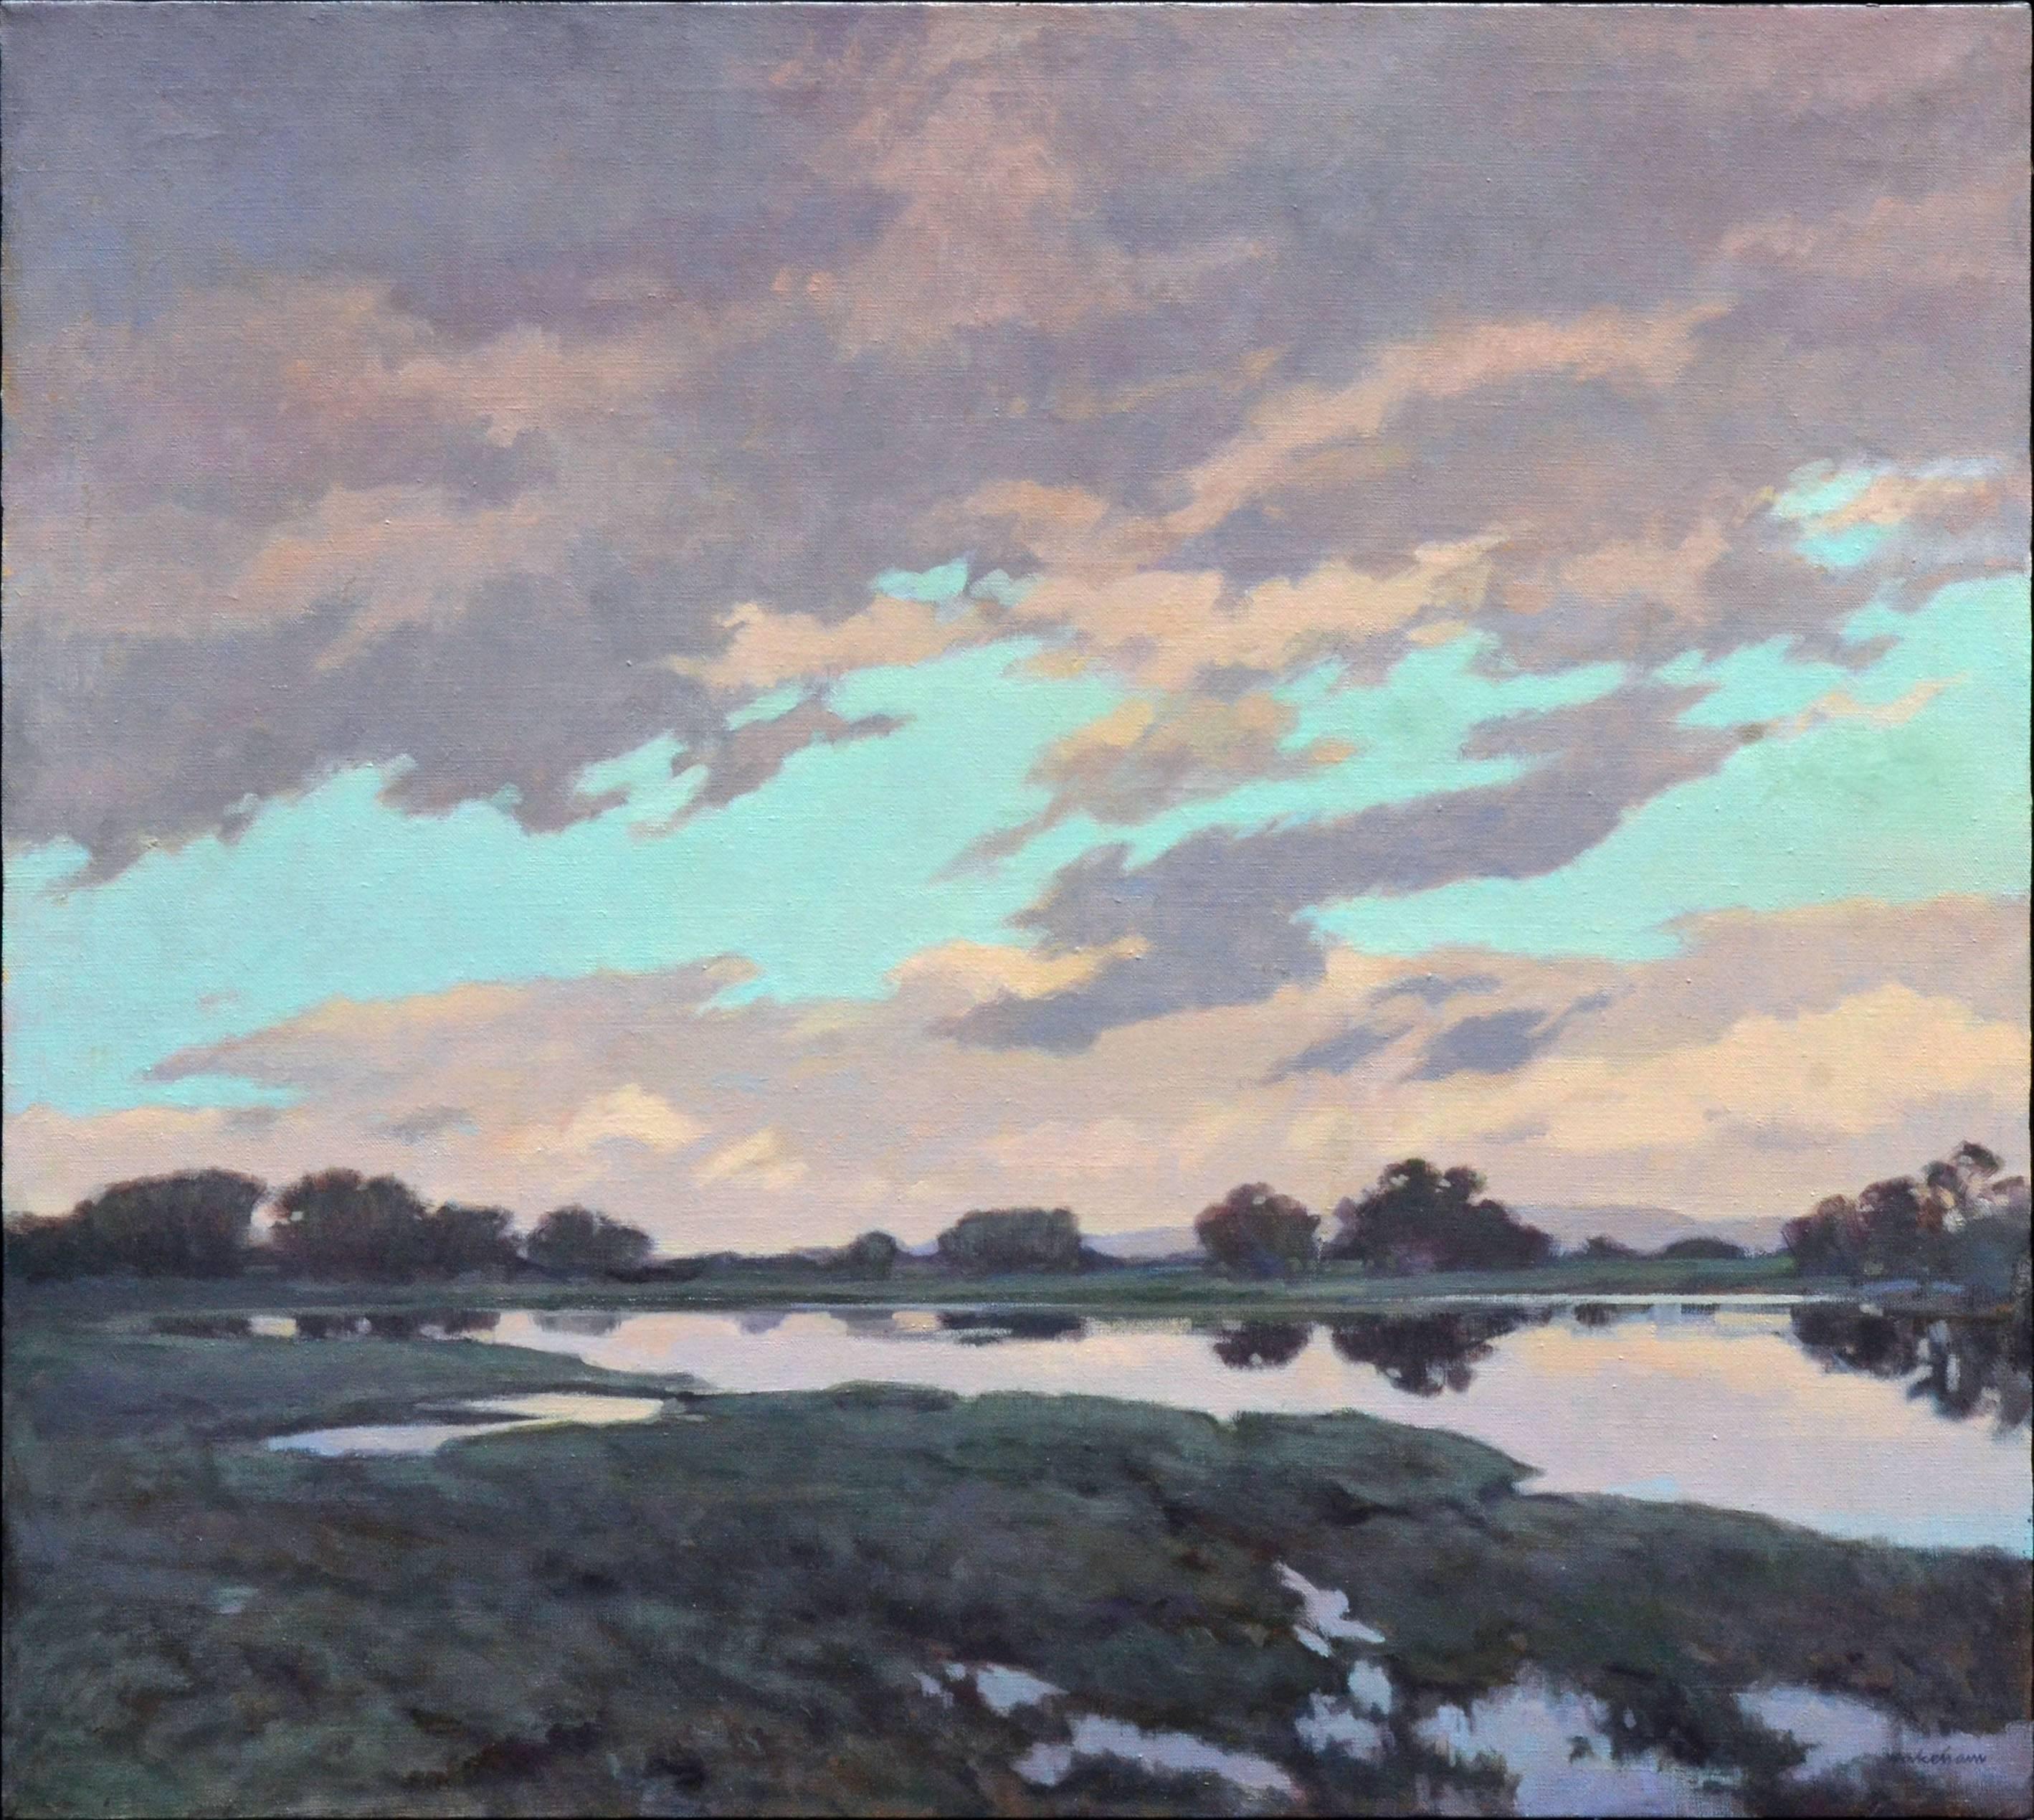 Early Morning Light by Duane Wakeham - Painting by Duane A. Wakeham